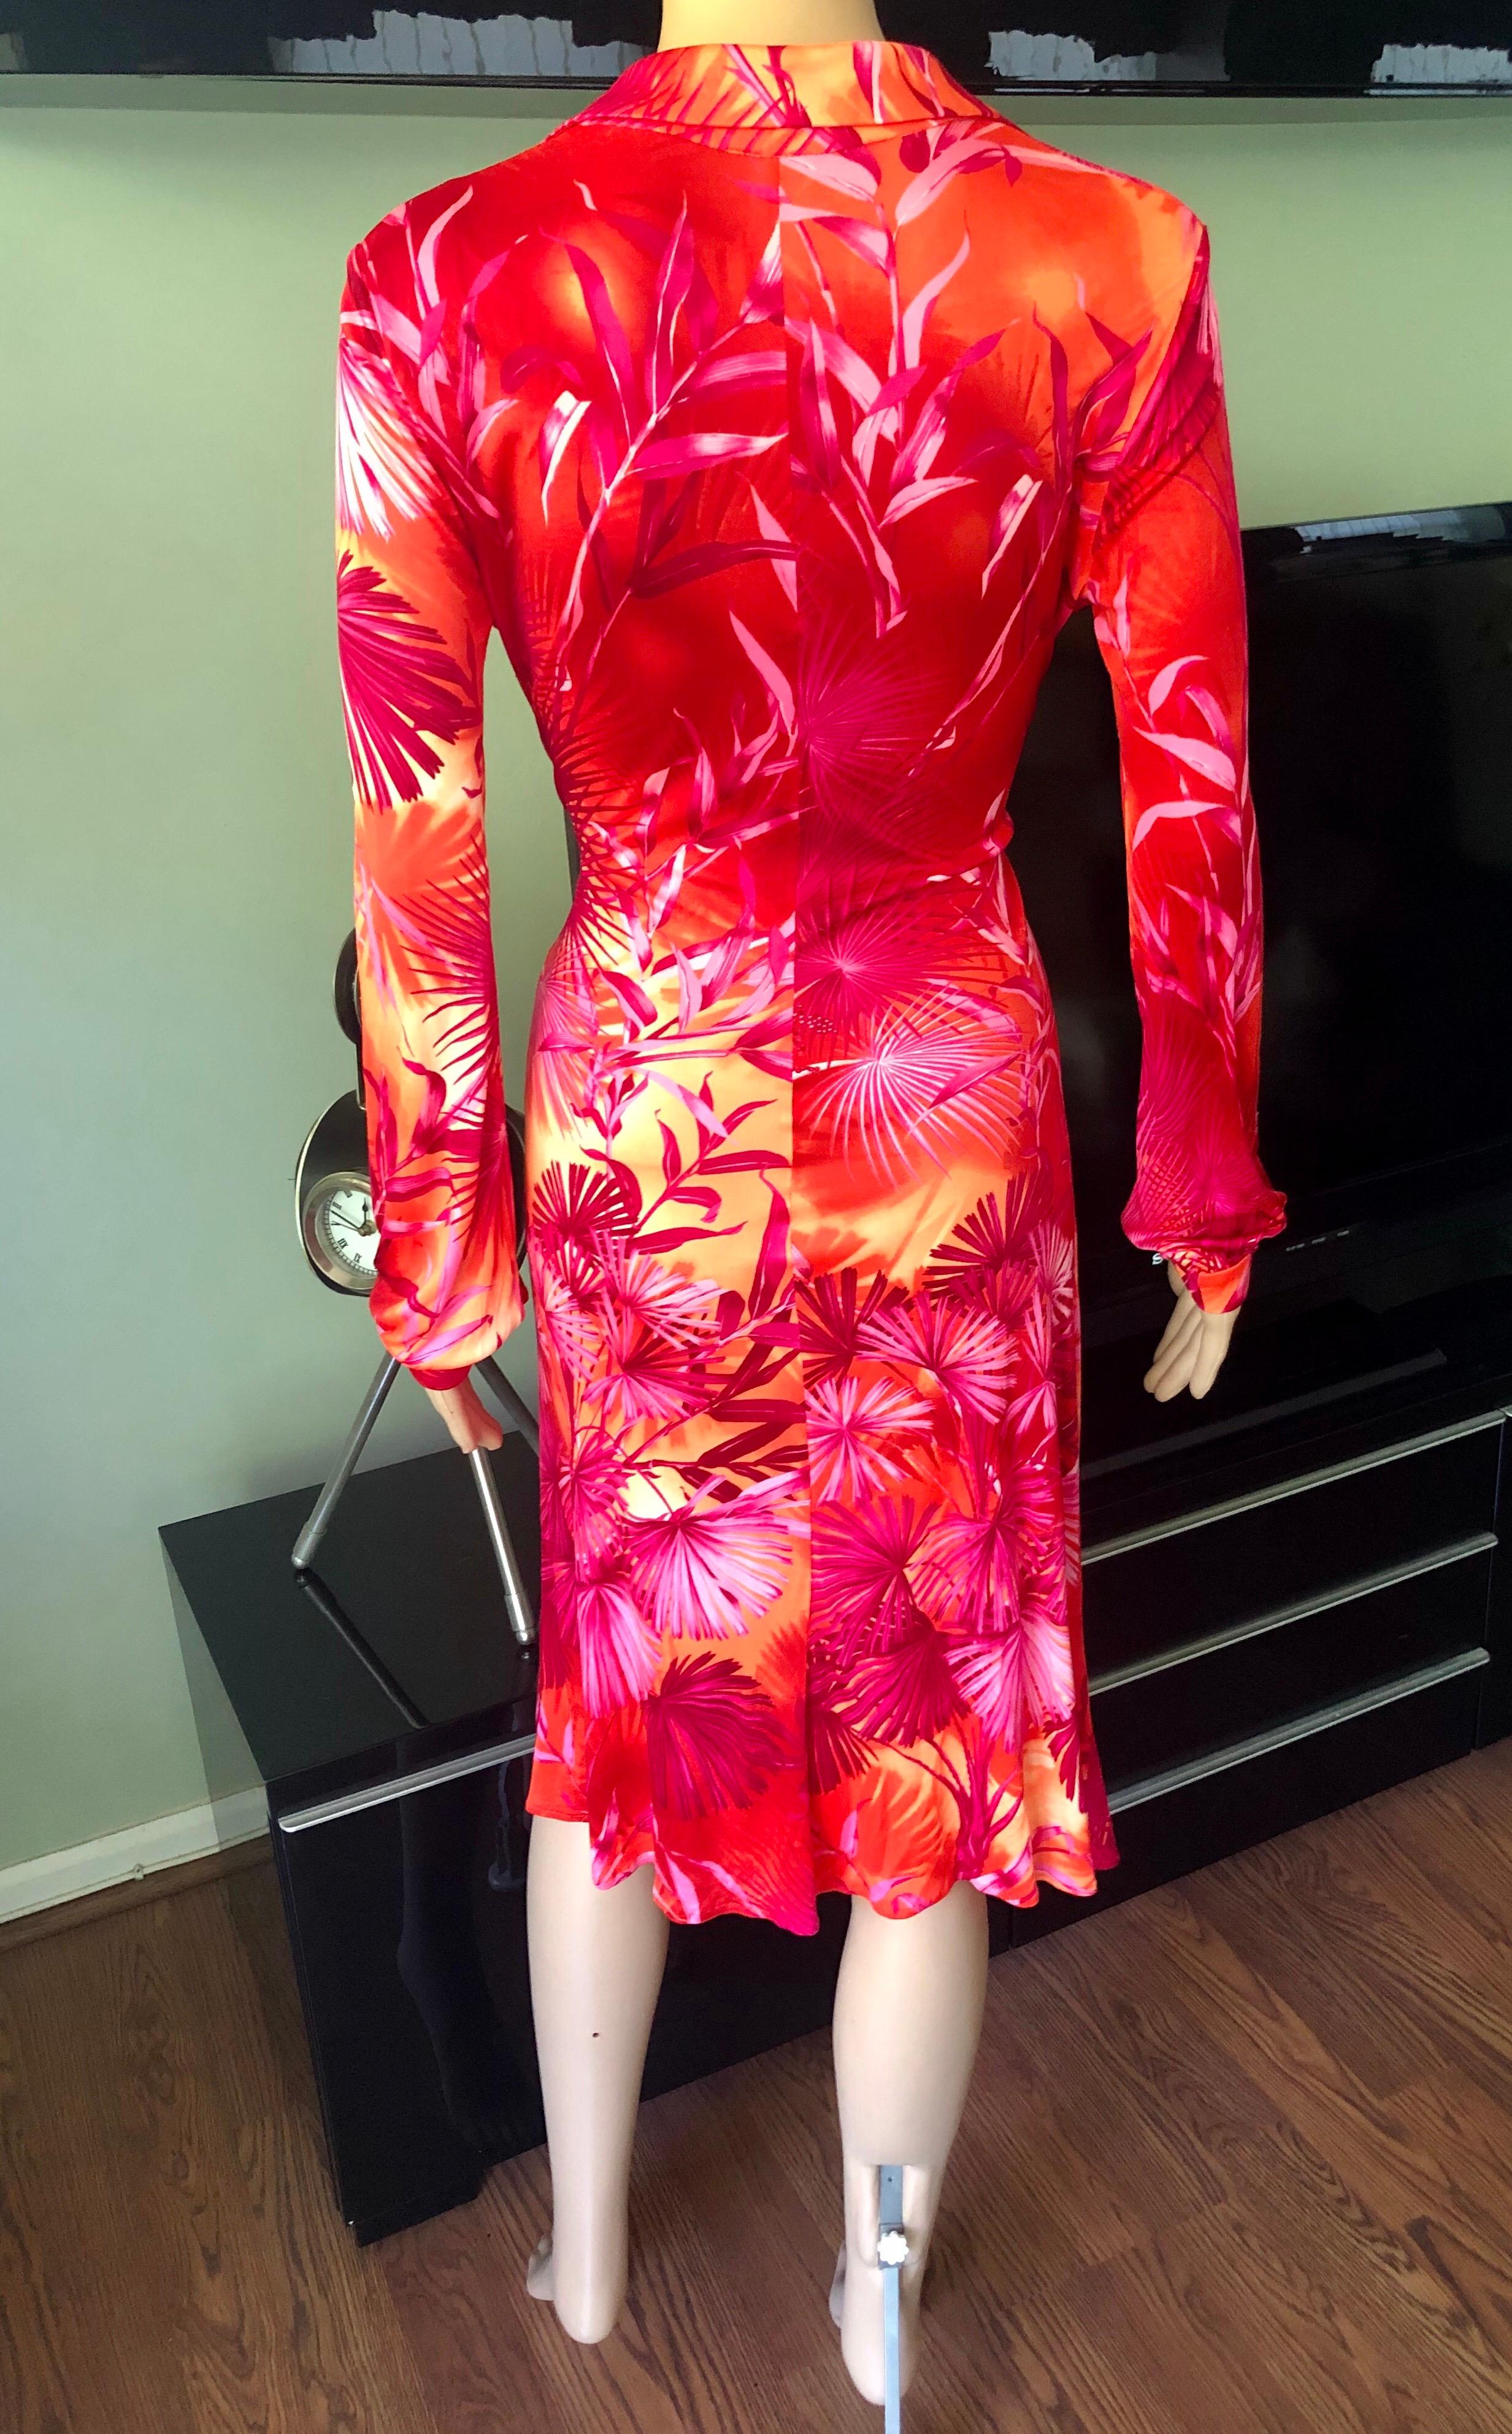 Gianni Versace Runway S/S 2000 Vintage Tropical Print Plunging Neckline Dress In Good Condition For Sale In Naples, FL